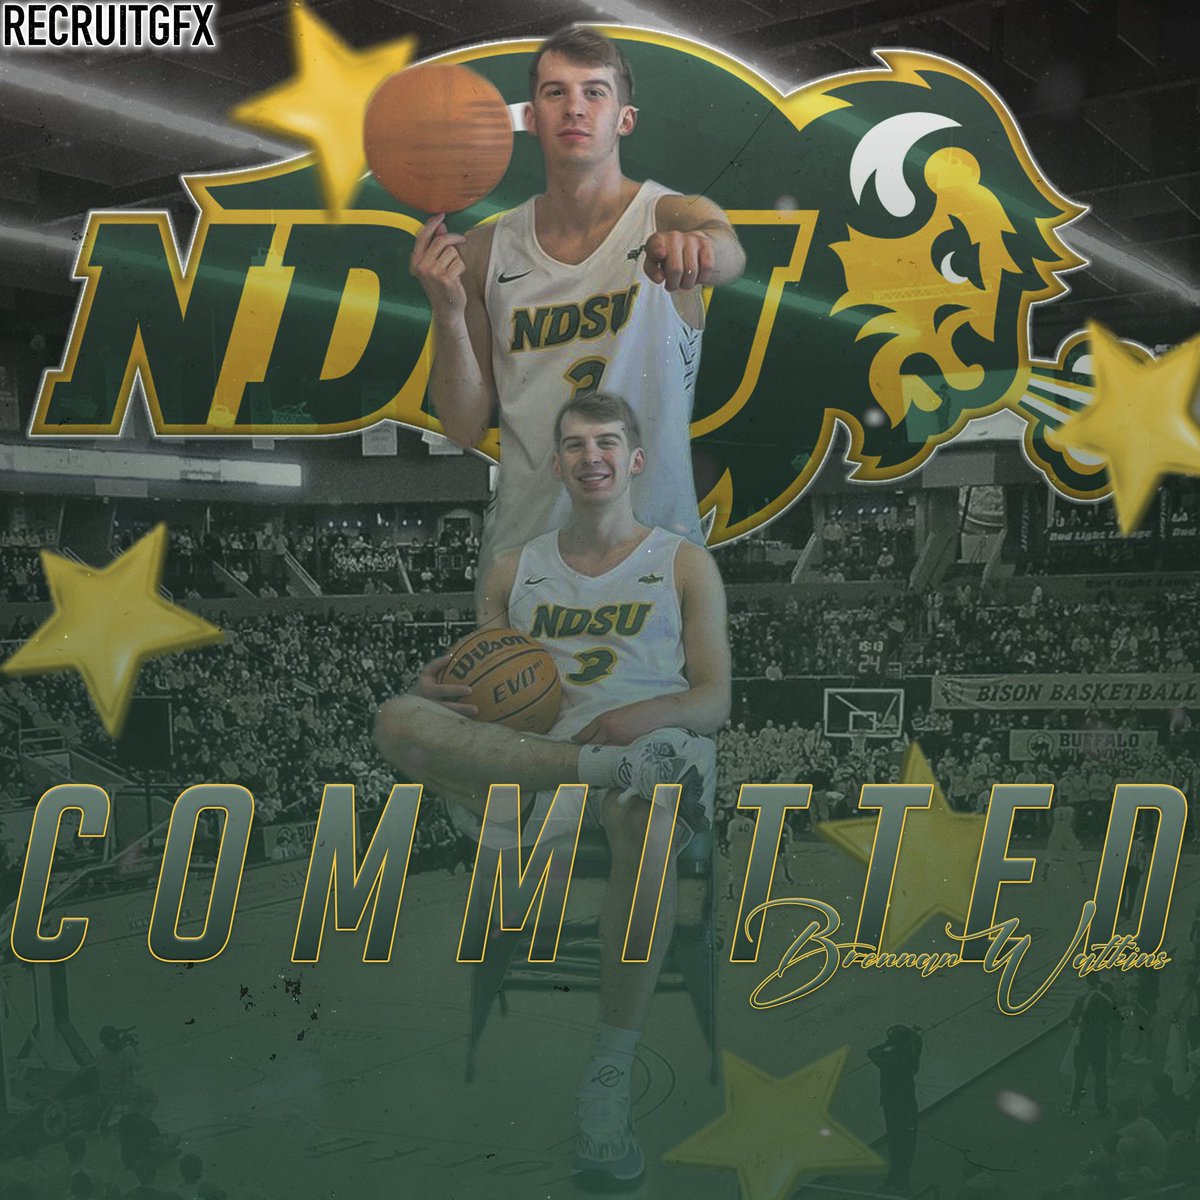 Let’s go Bison🤘🏼 #committed